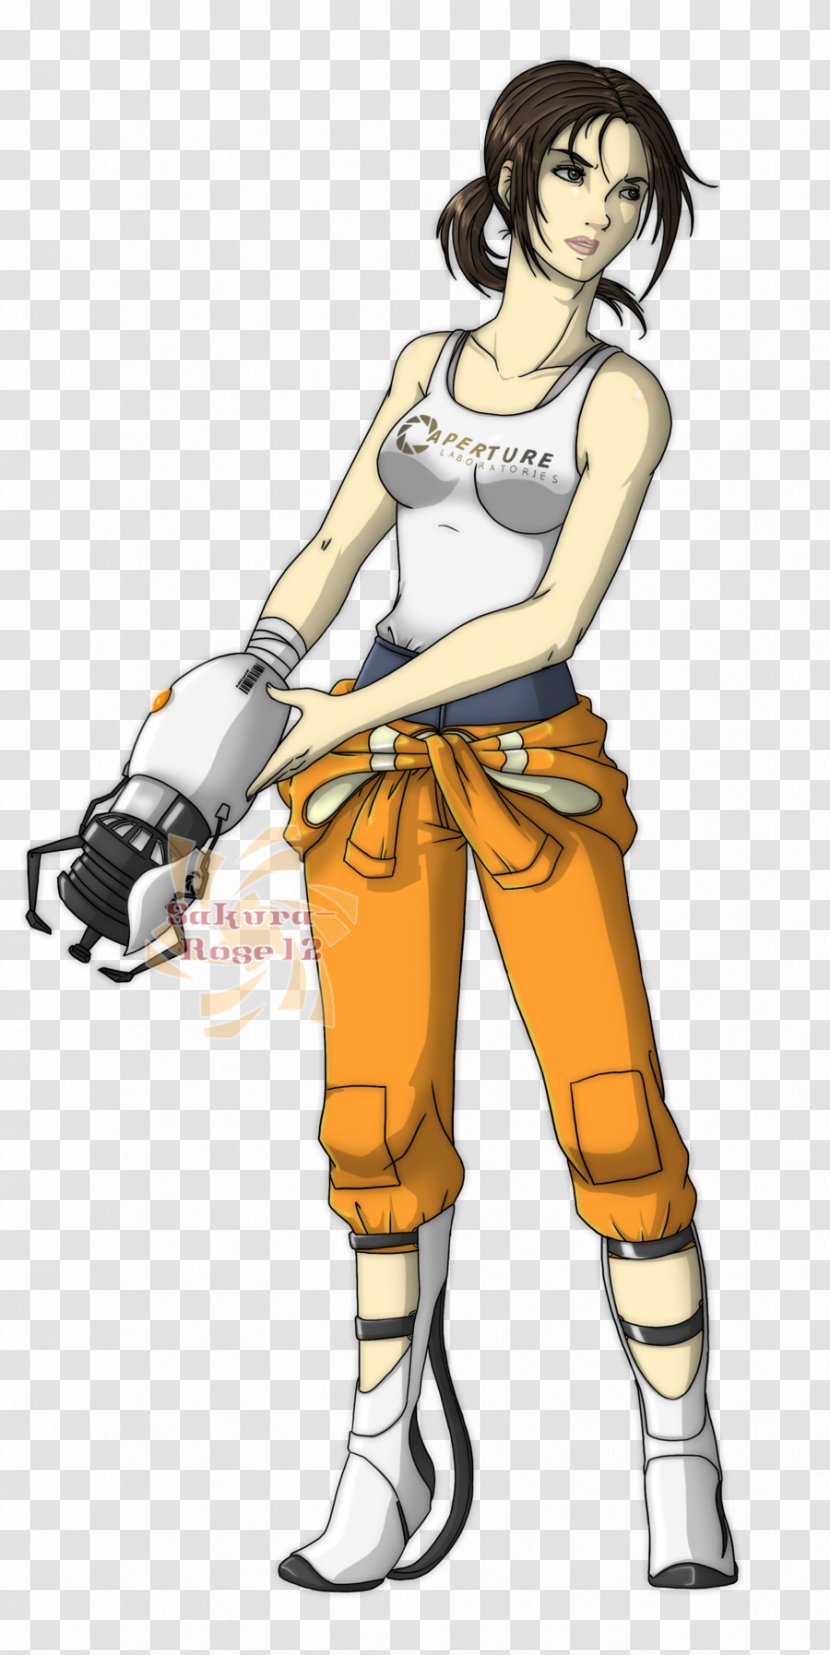 Portal 2 Chell Video Game Character - Silhouette Transparent PNG